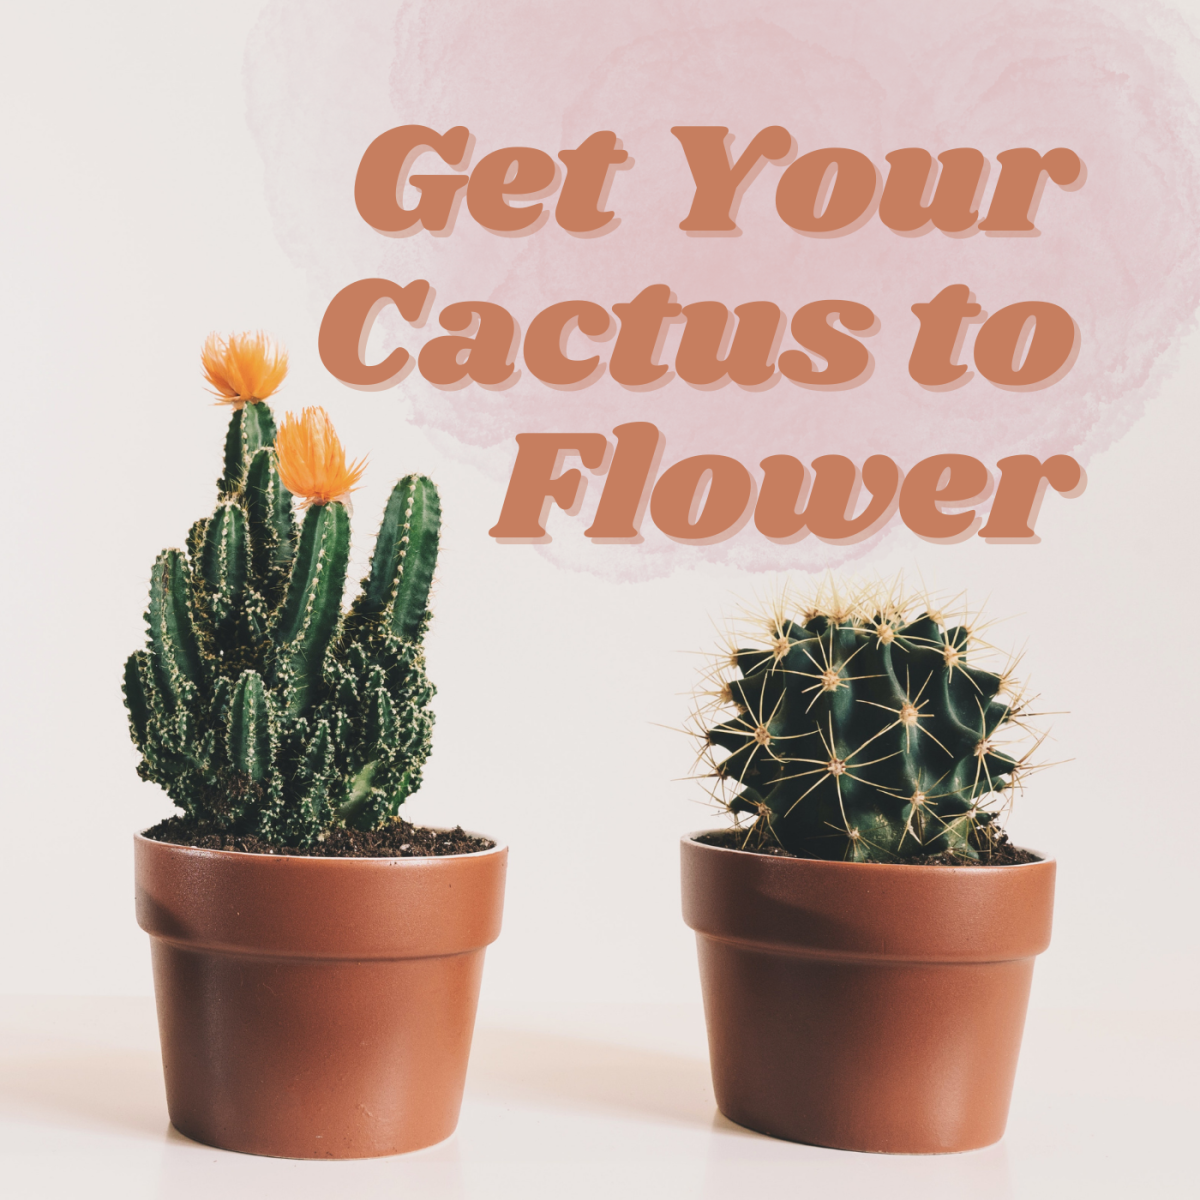 Can cacti flower indoors? With proper care and a little luck, get your cactus to bloom.